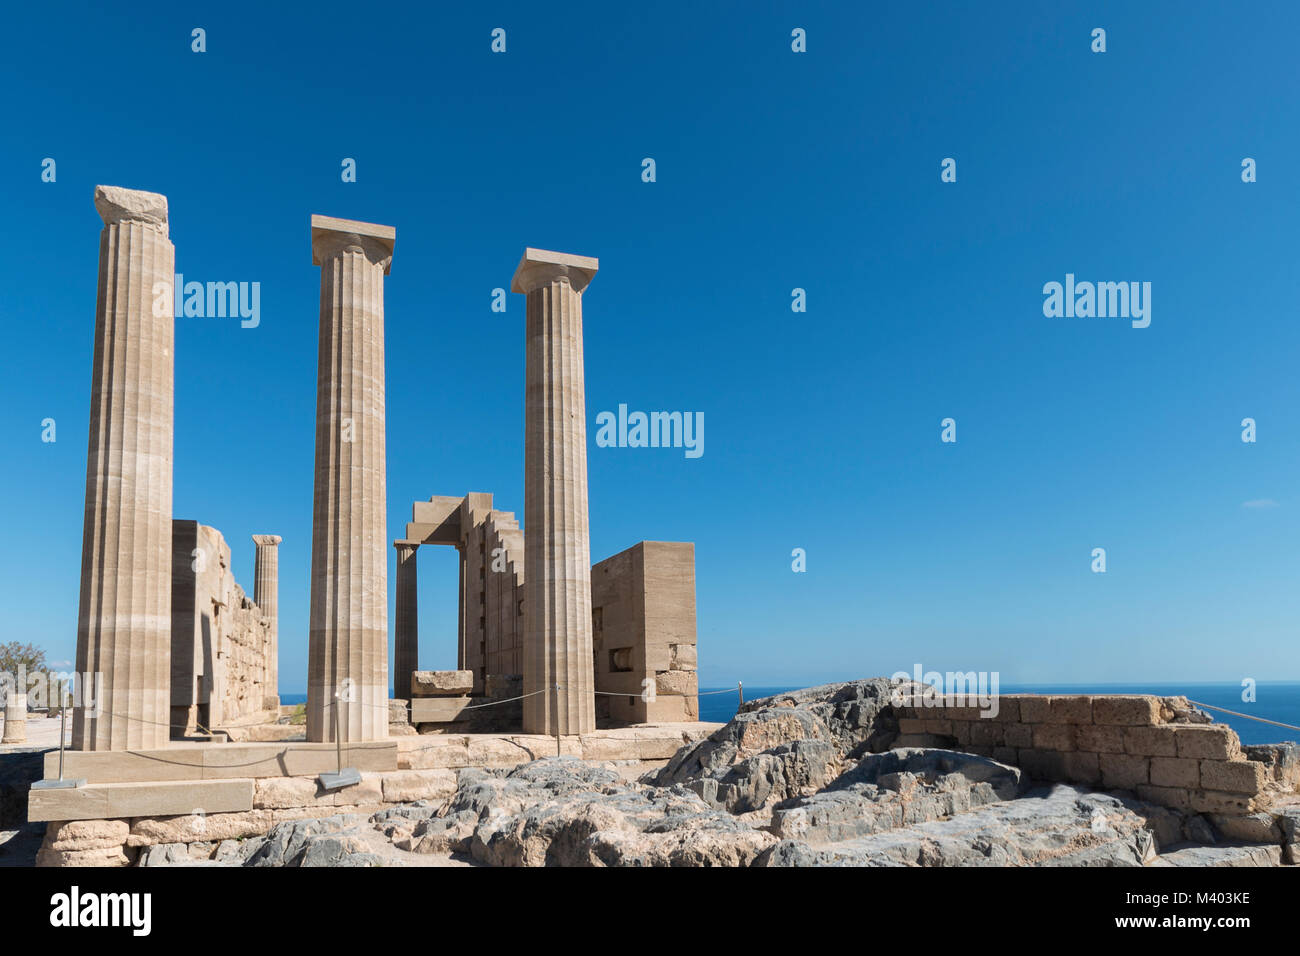 Acropolis of Lindos. Doric columns of the ancient Temple of Athena Lindia the IV, Rhodes, Greece. Stock Photo